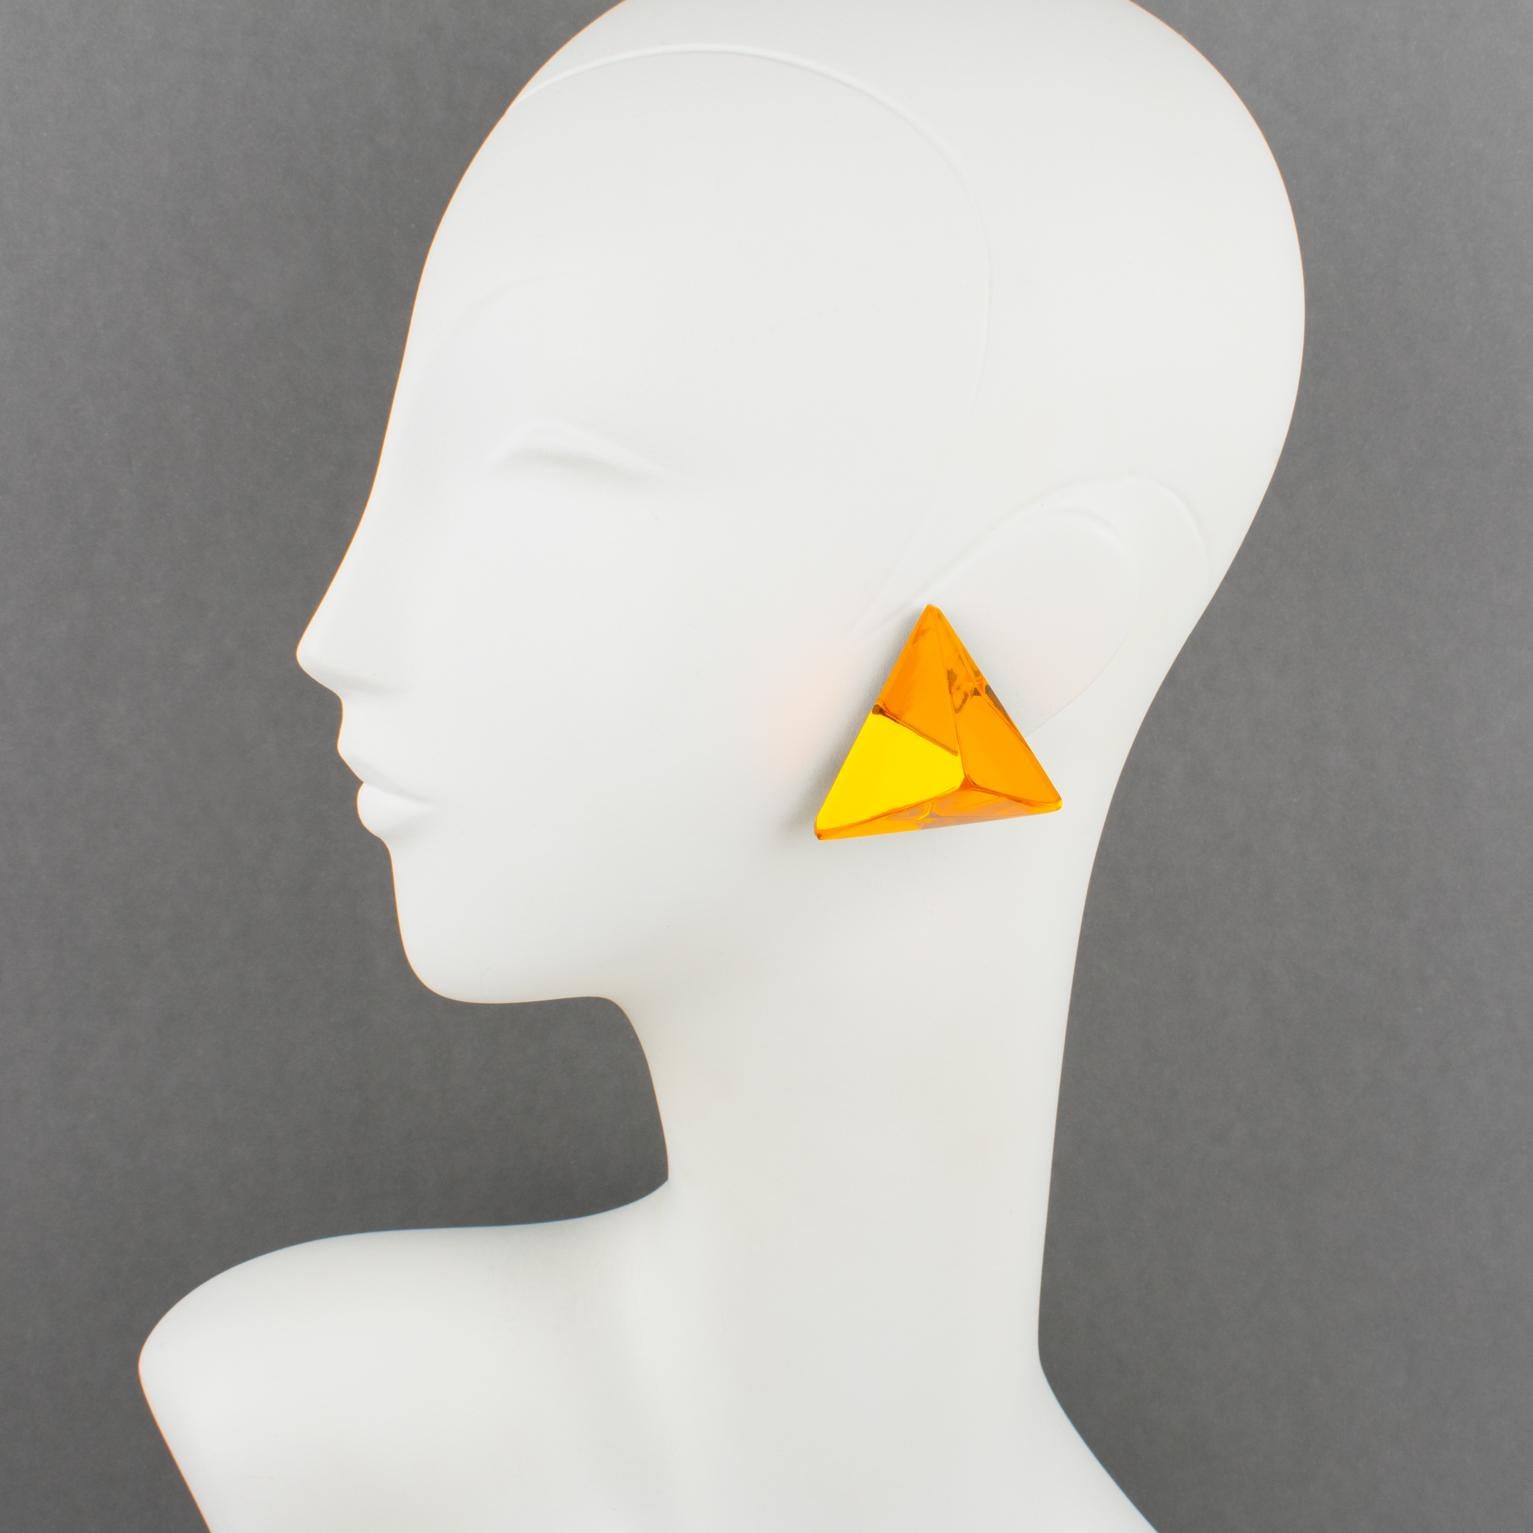 Harriet Bauknight for Kaso created these lovely oversized Lucite clip-on earrings. The pyramidal geometric design features a dimensional layer with a neon orange mirror-textured pattern. The Kaso paper sticker is missing, but the gray background and